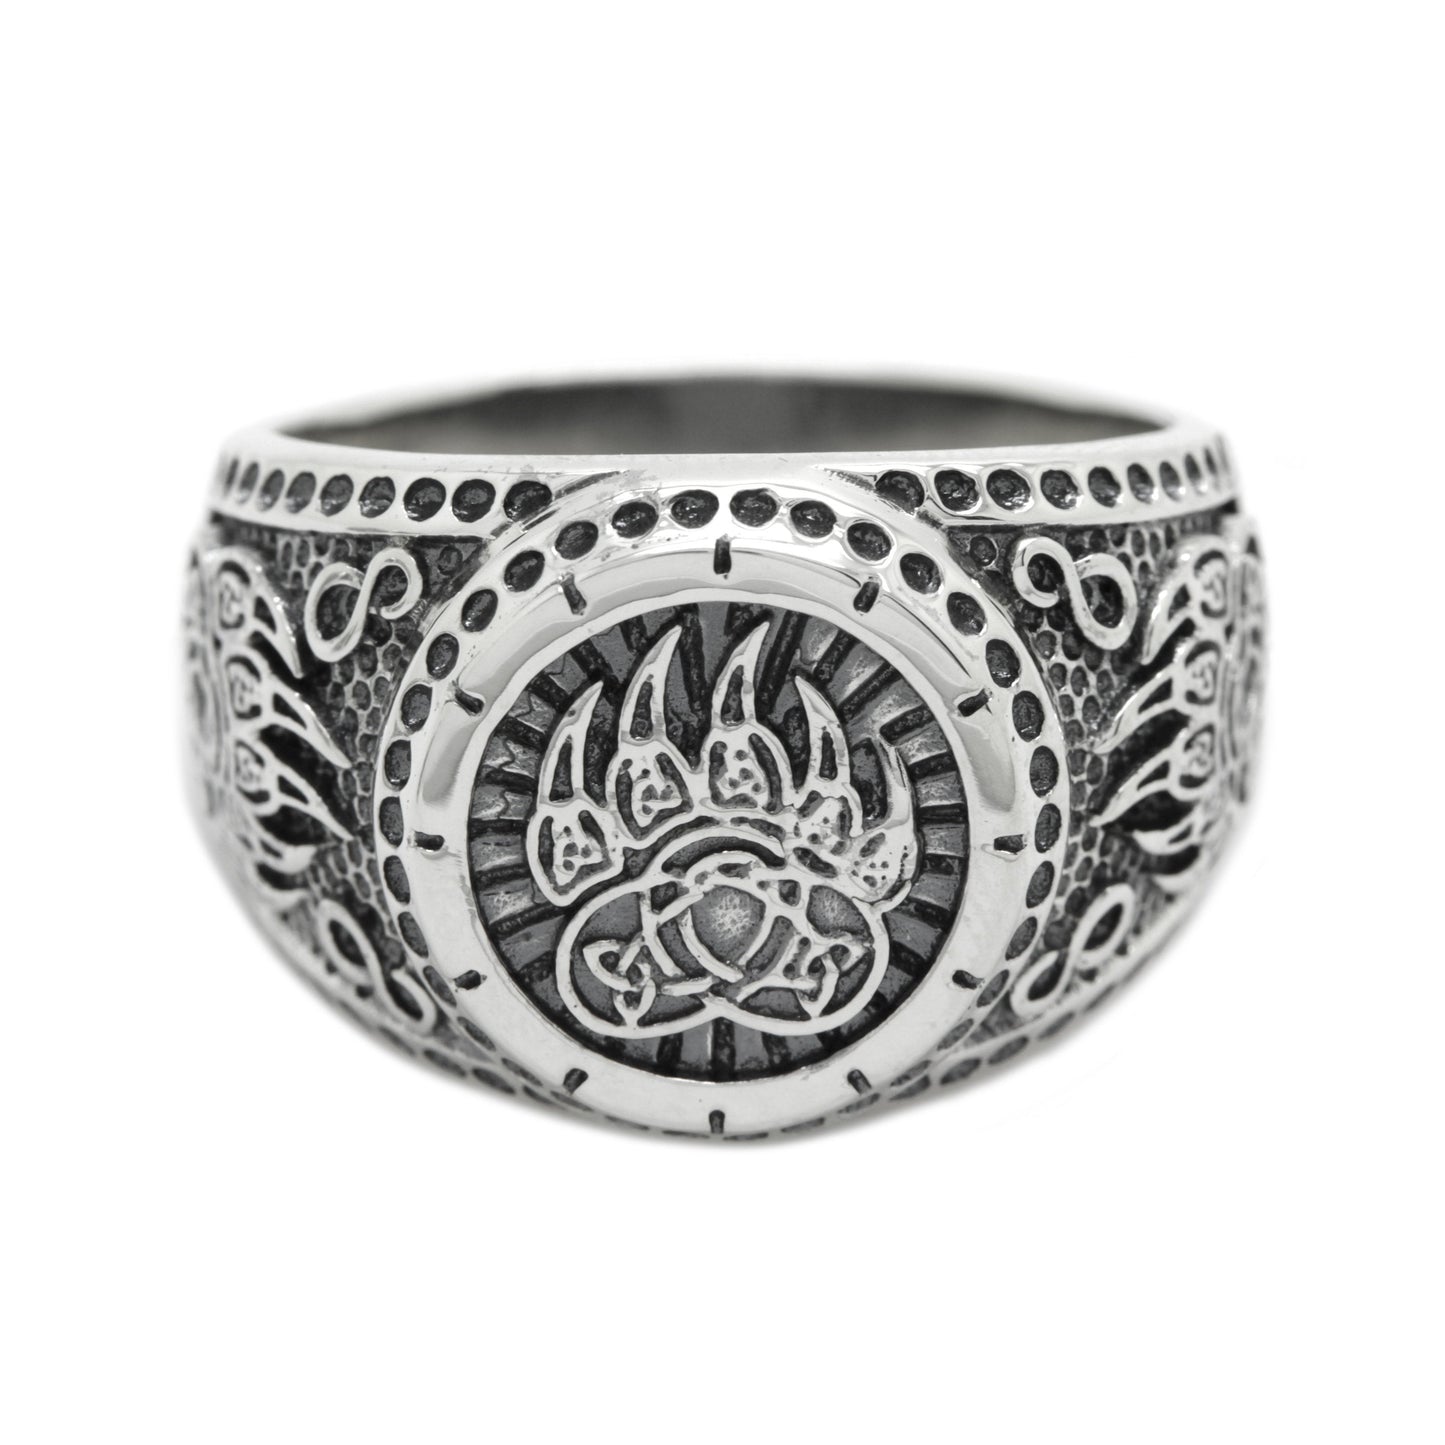 Bear Paw, Bear Claw, Indian Tribe Men's Ring Sterling Silver 925